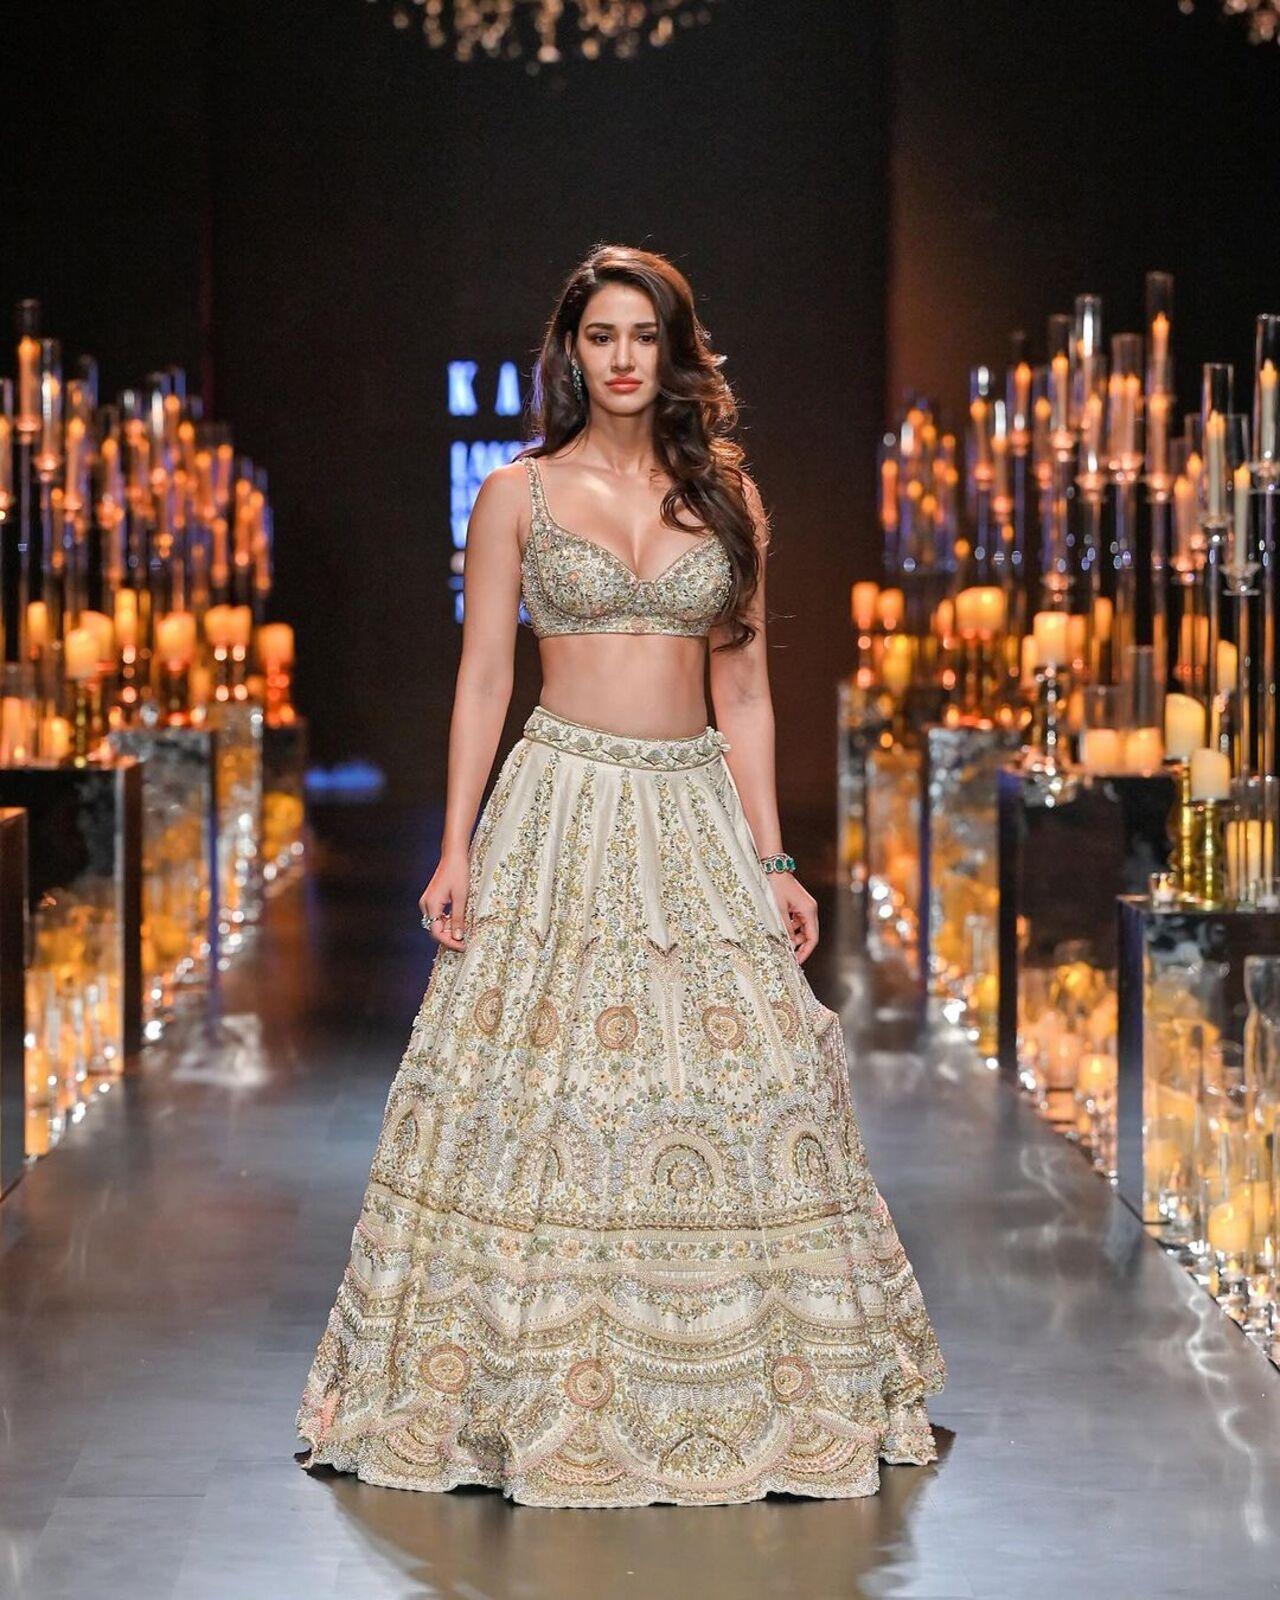 Disha Patani walked in all her glory on the ramp in a shimmery golden lehenga